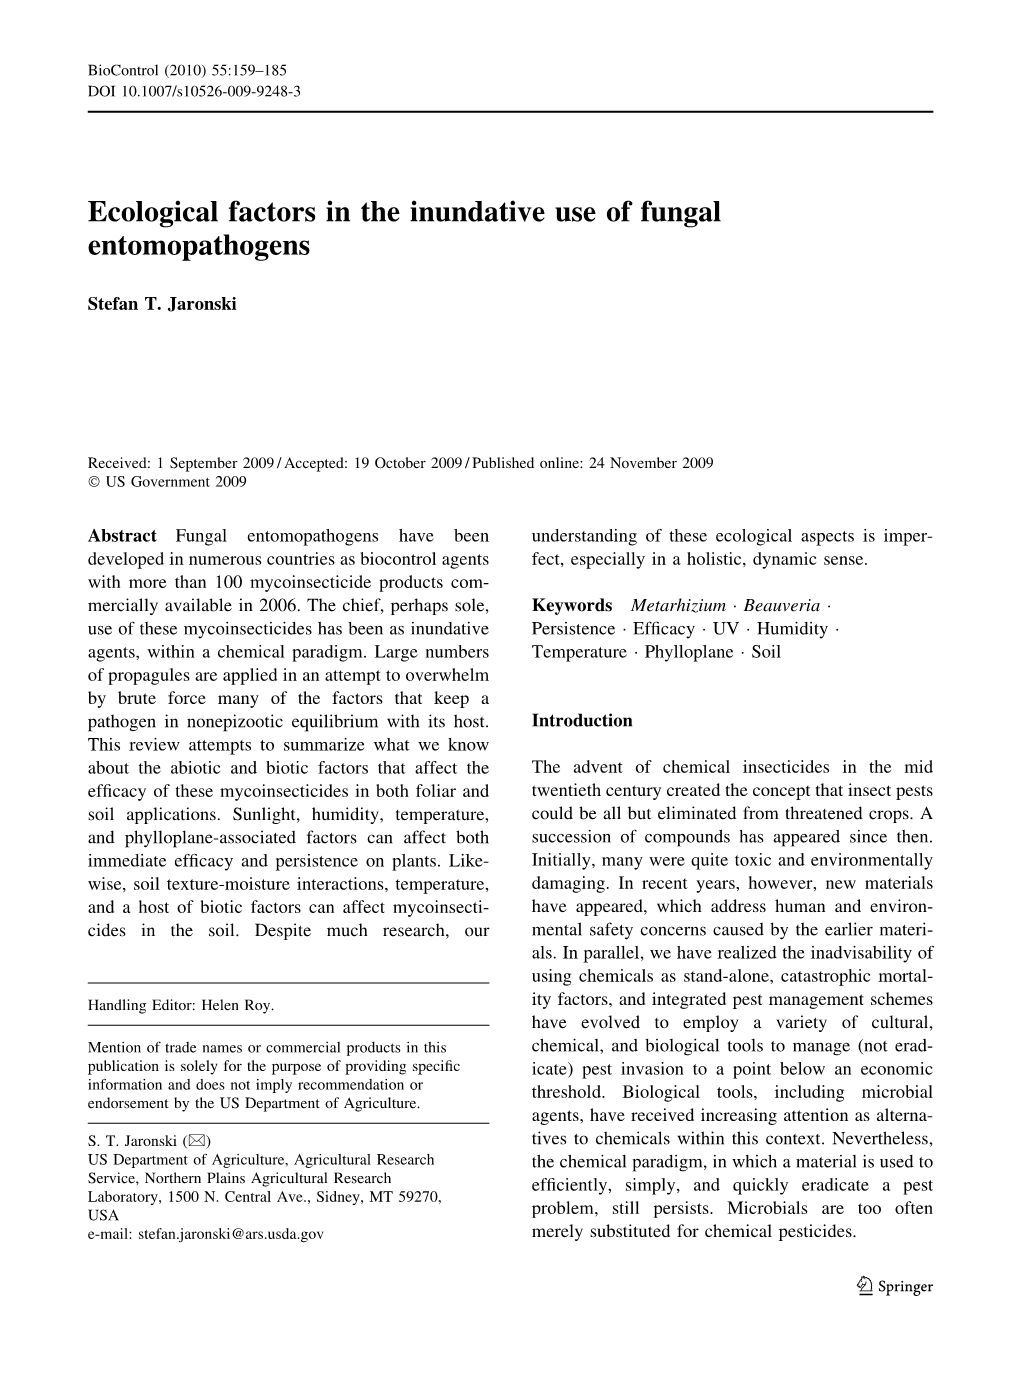 Ecological Factors in the Inundative Use of Fungal Entomopathogens